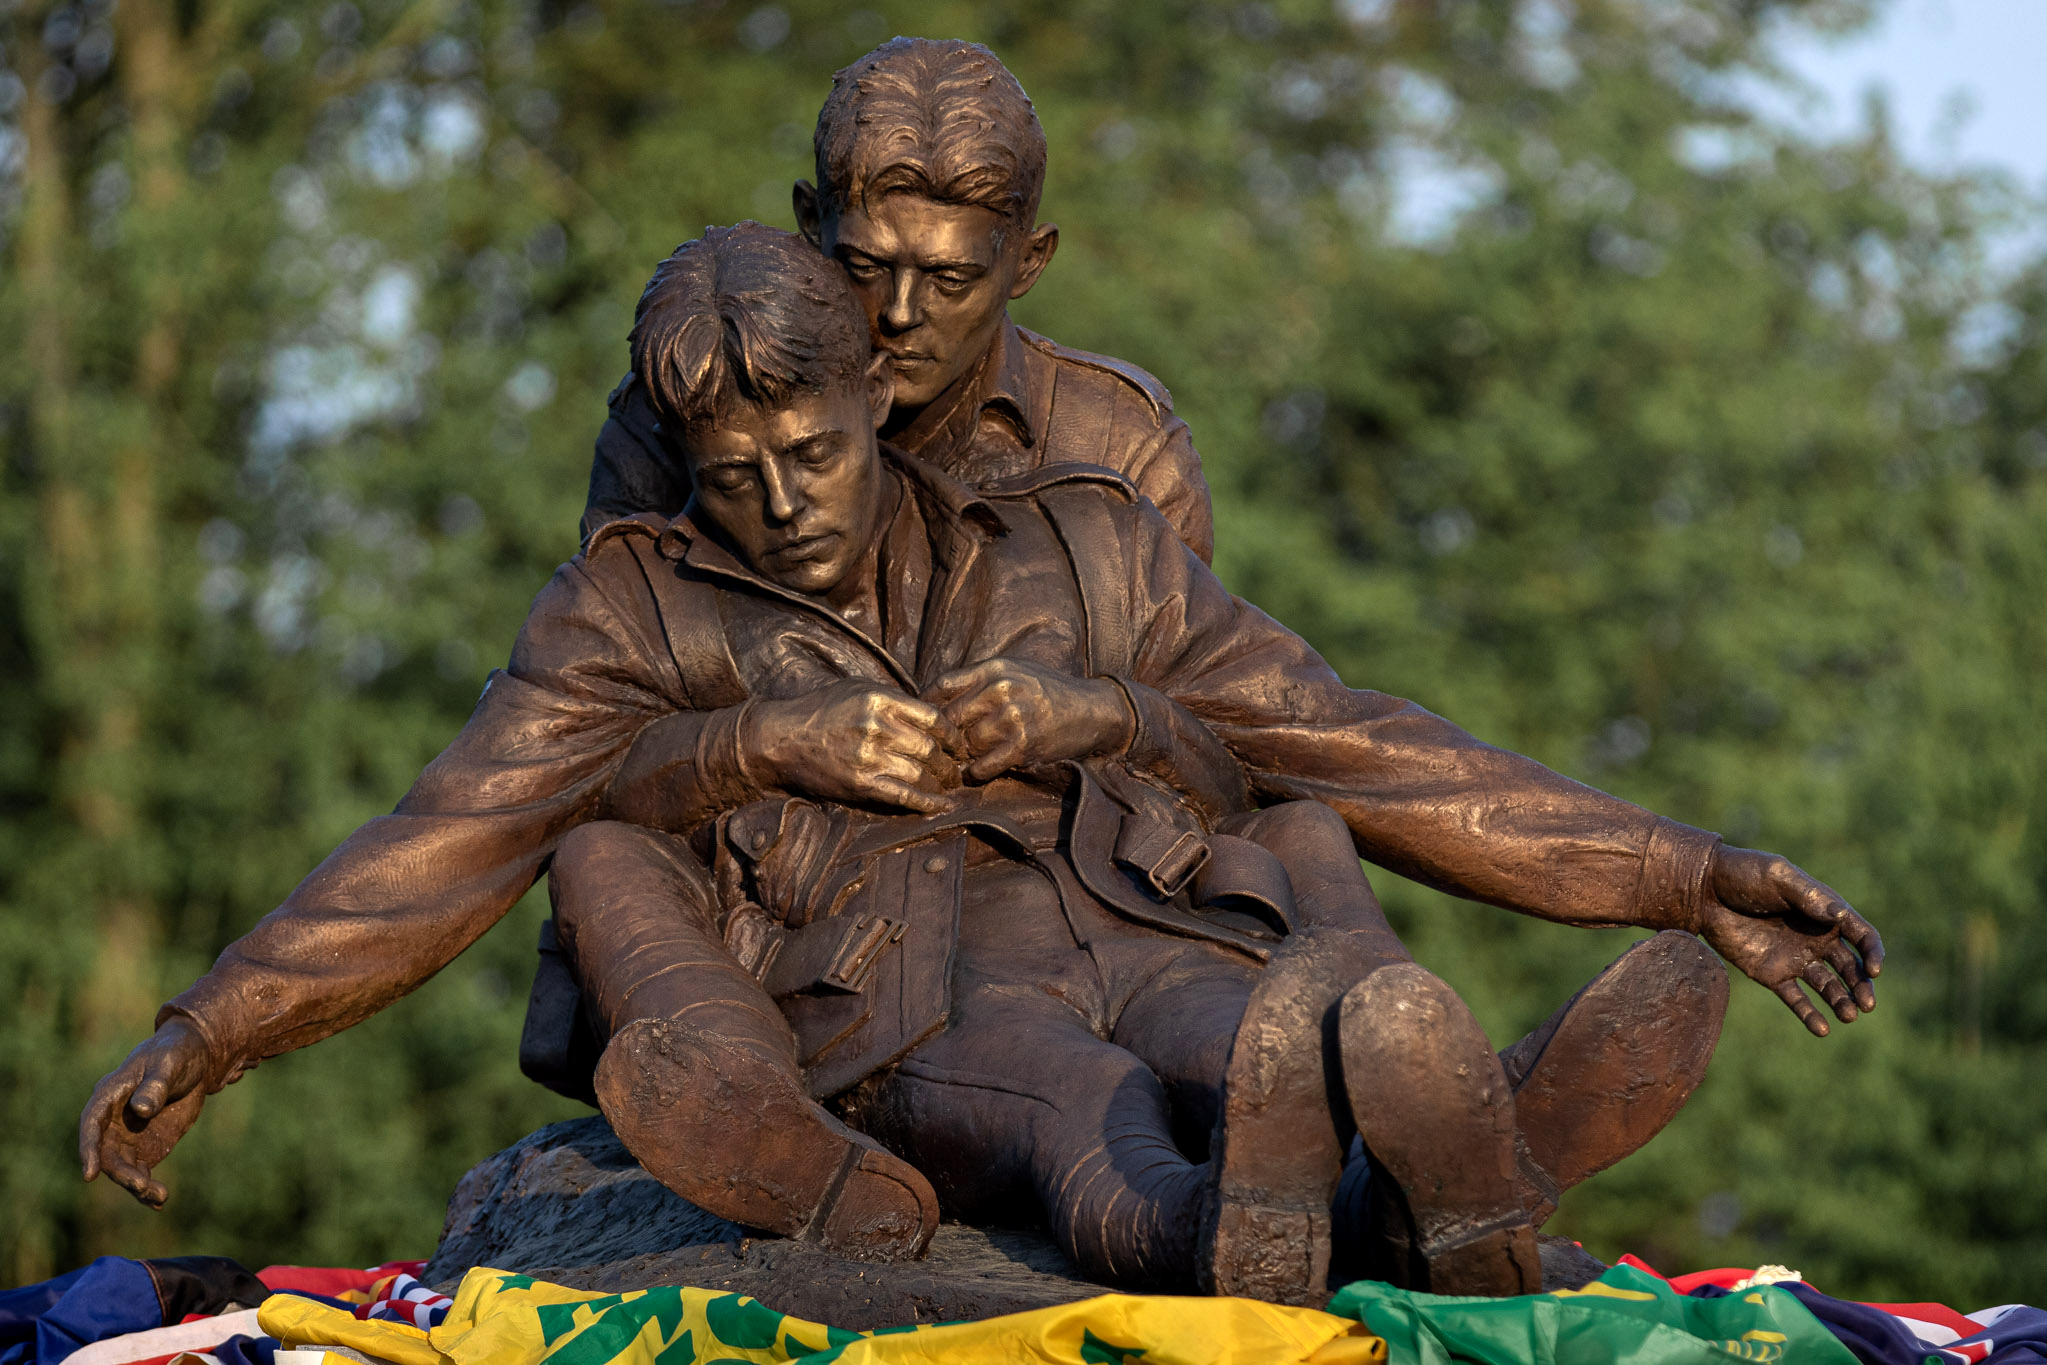 Brothers in arms Memorial